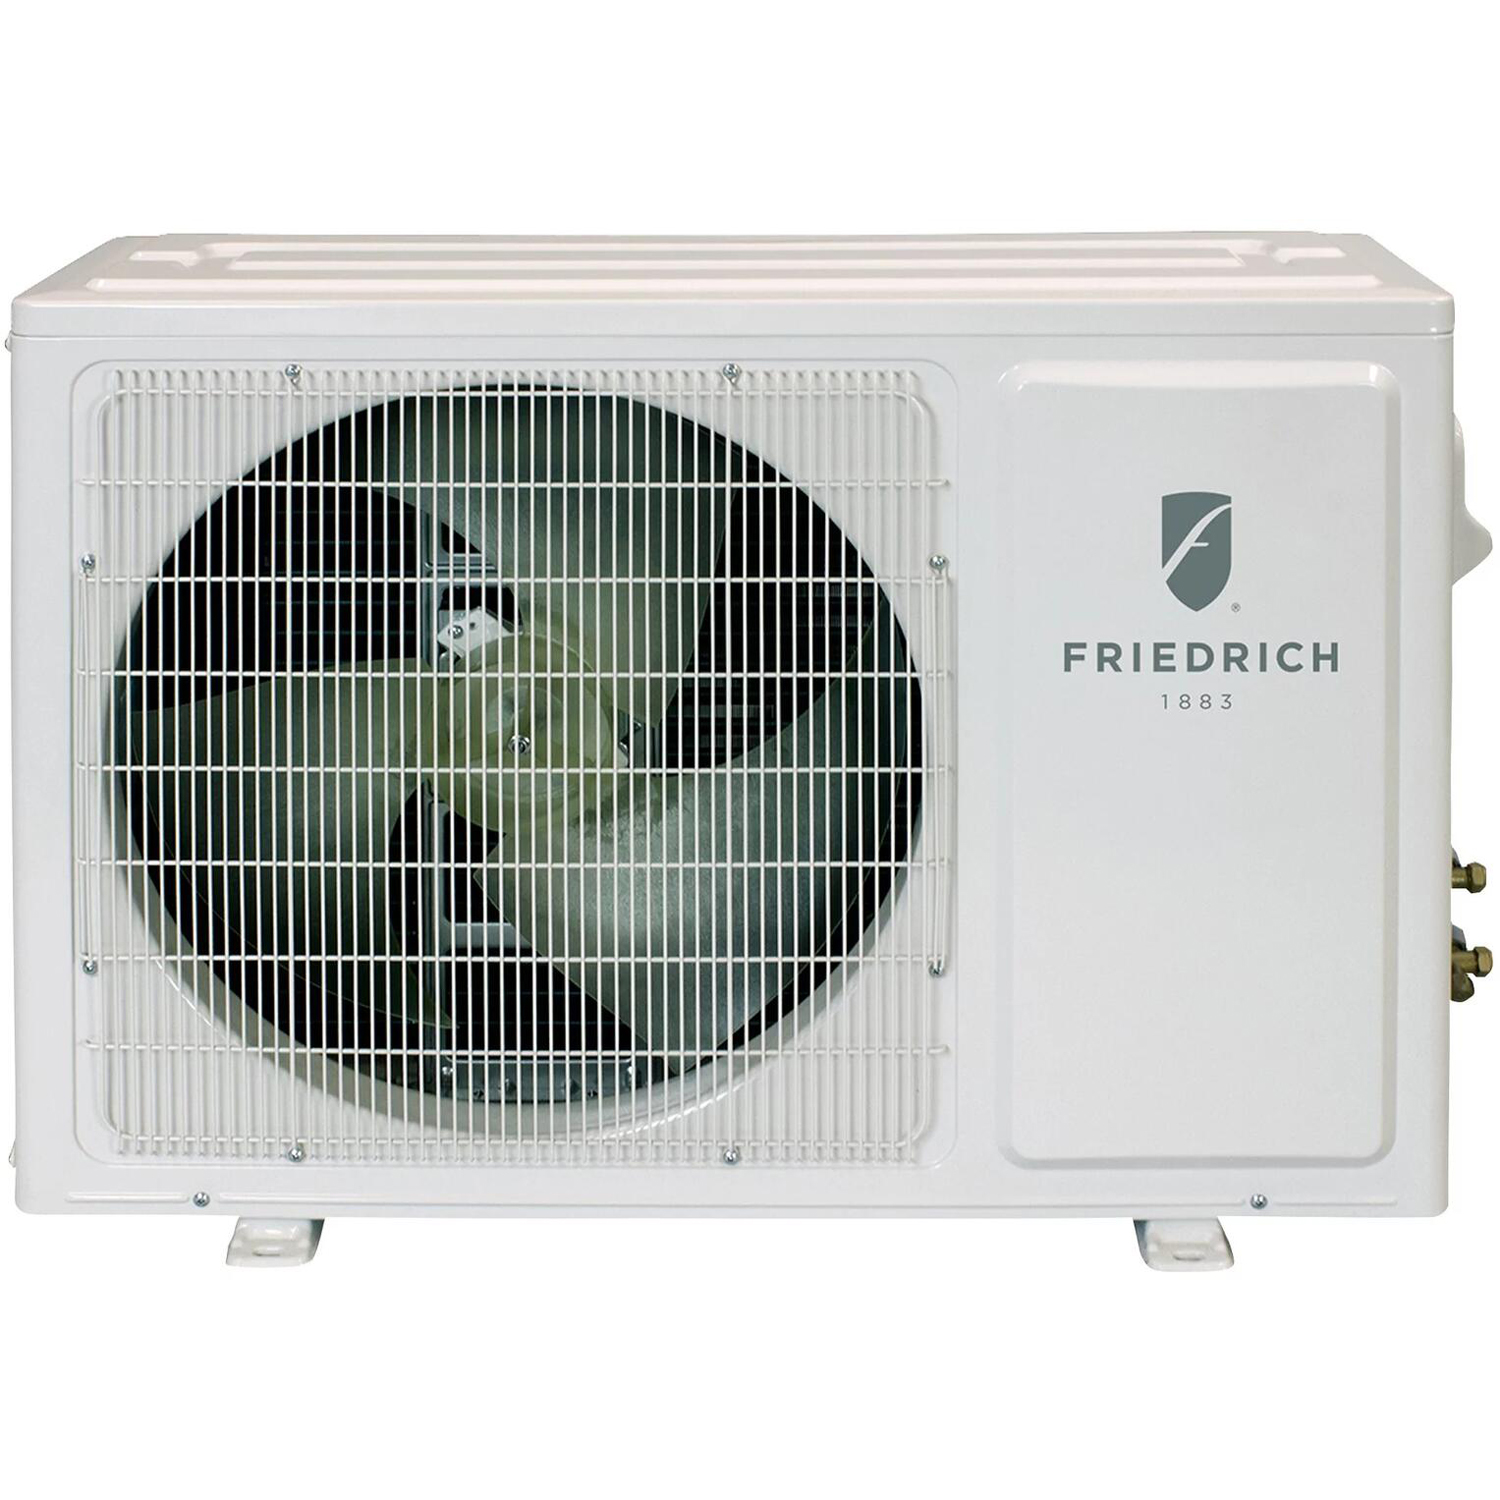 Photos - Other large household technique Friedrich Floating Air Pro Outdoor 9000 BTU Air Conditioner and Heating (F 